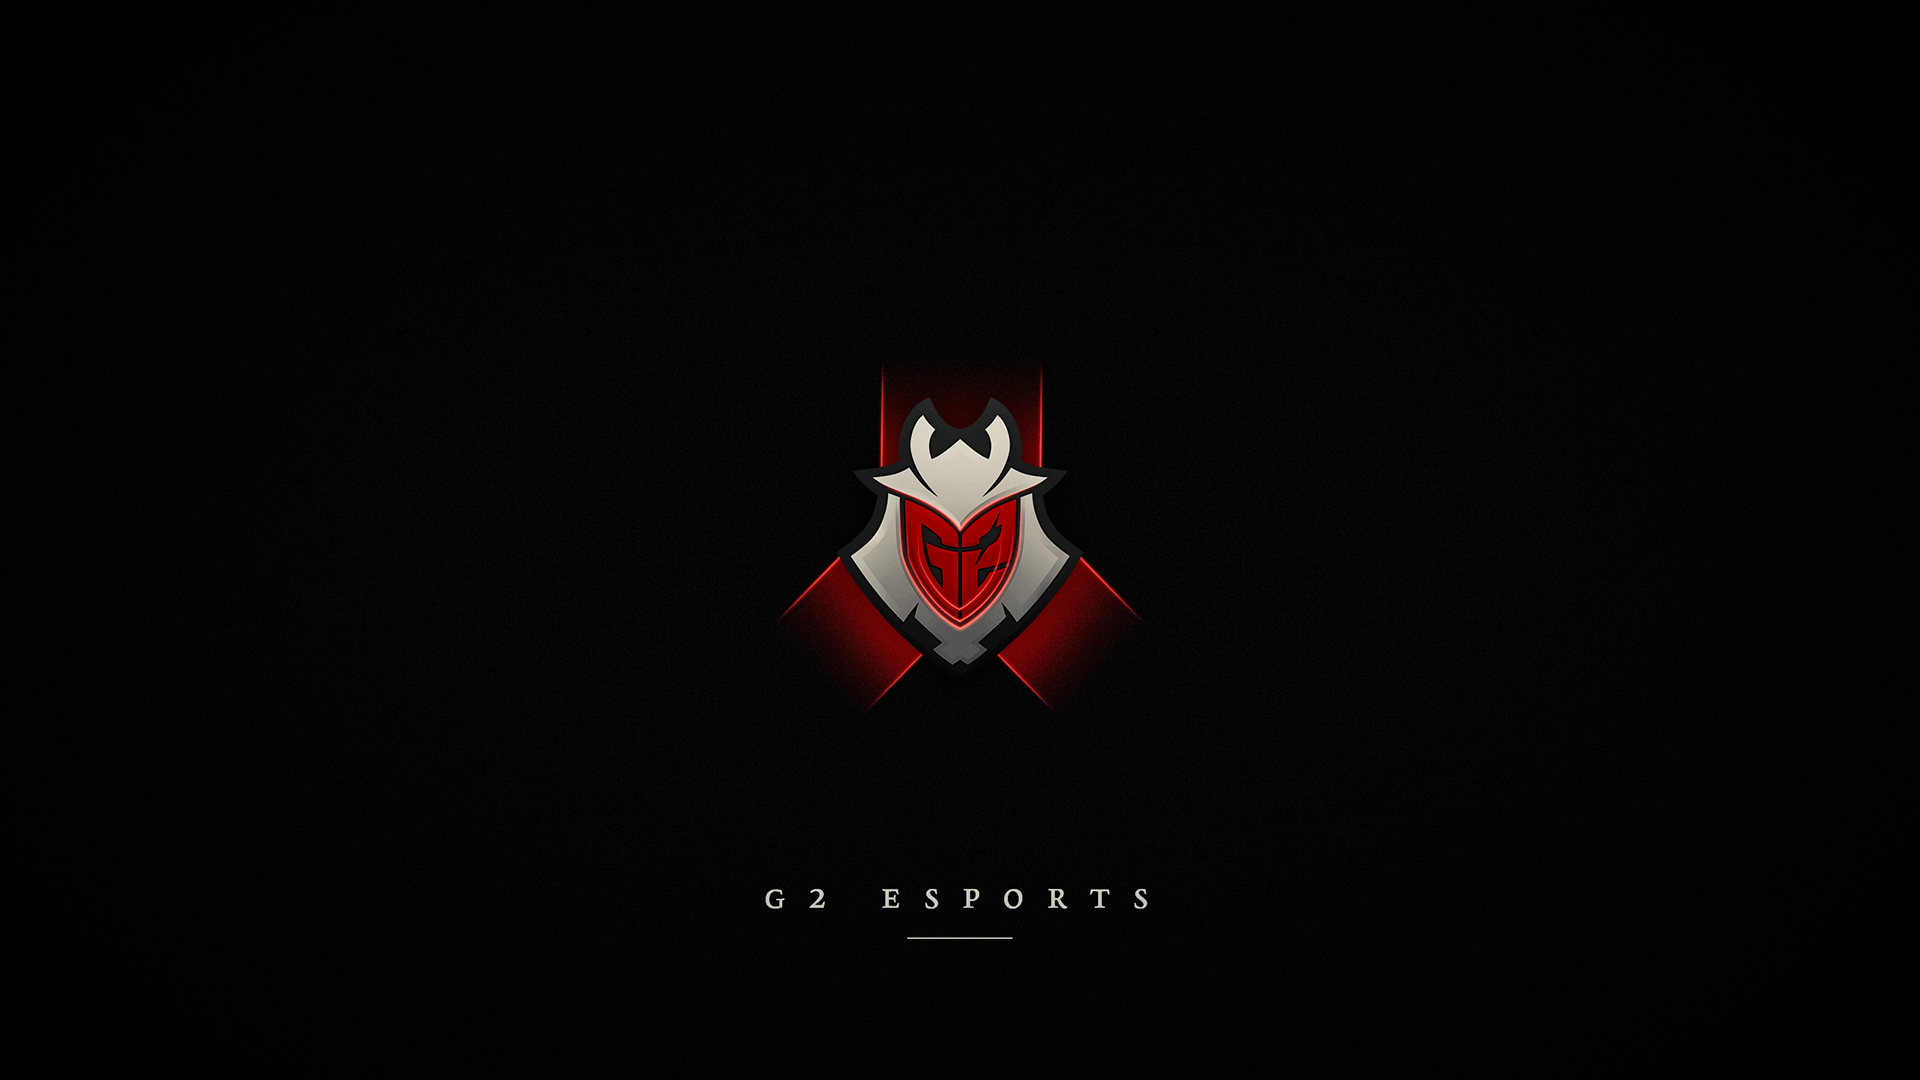 G2 Esports. CS:GO Wallpaper and Background